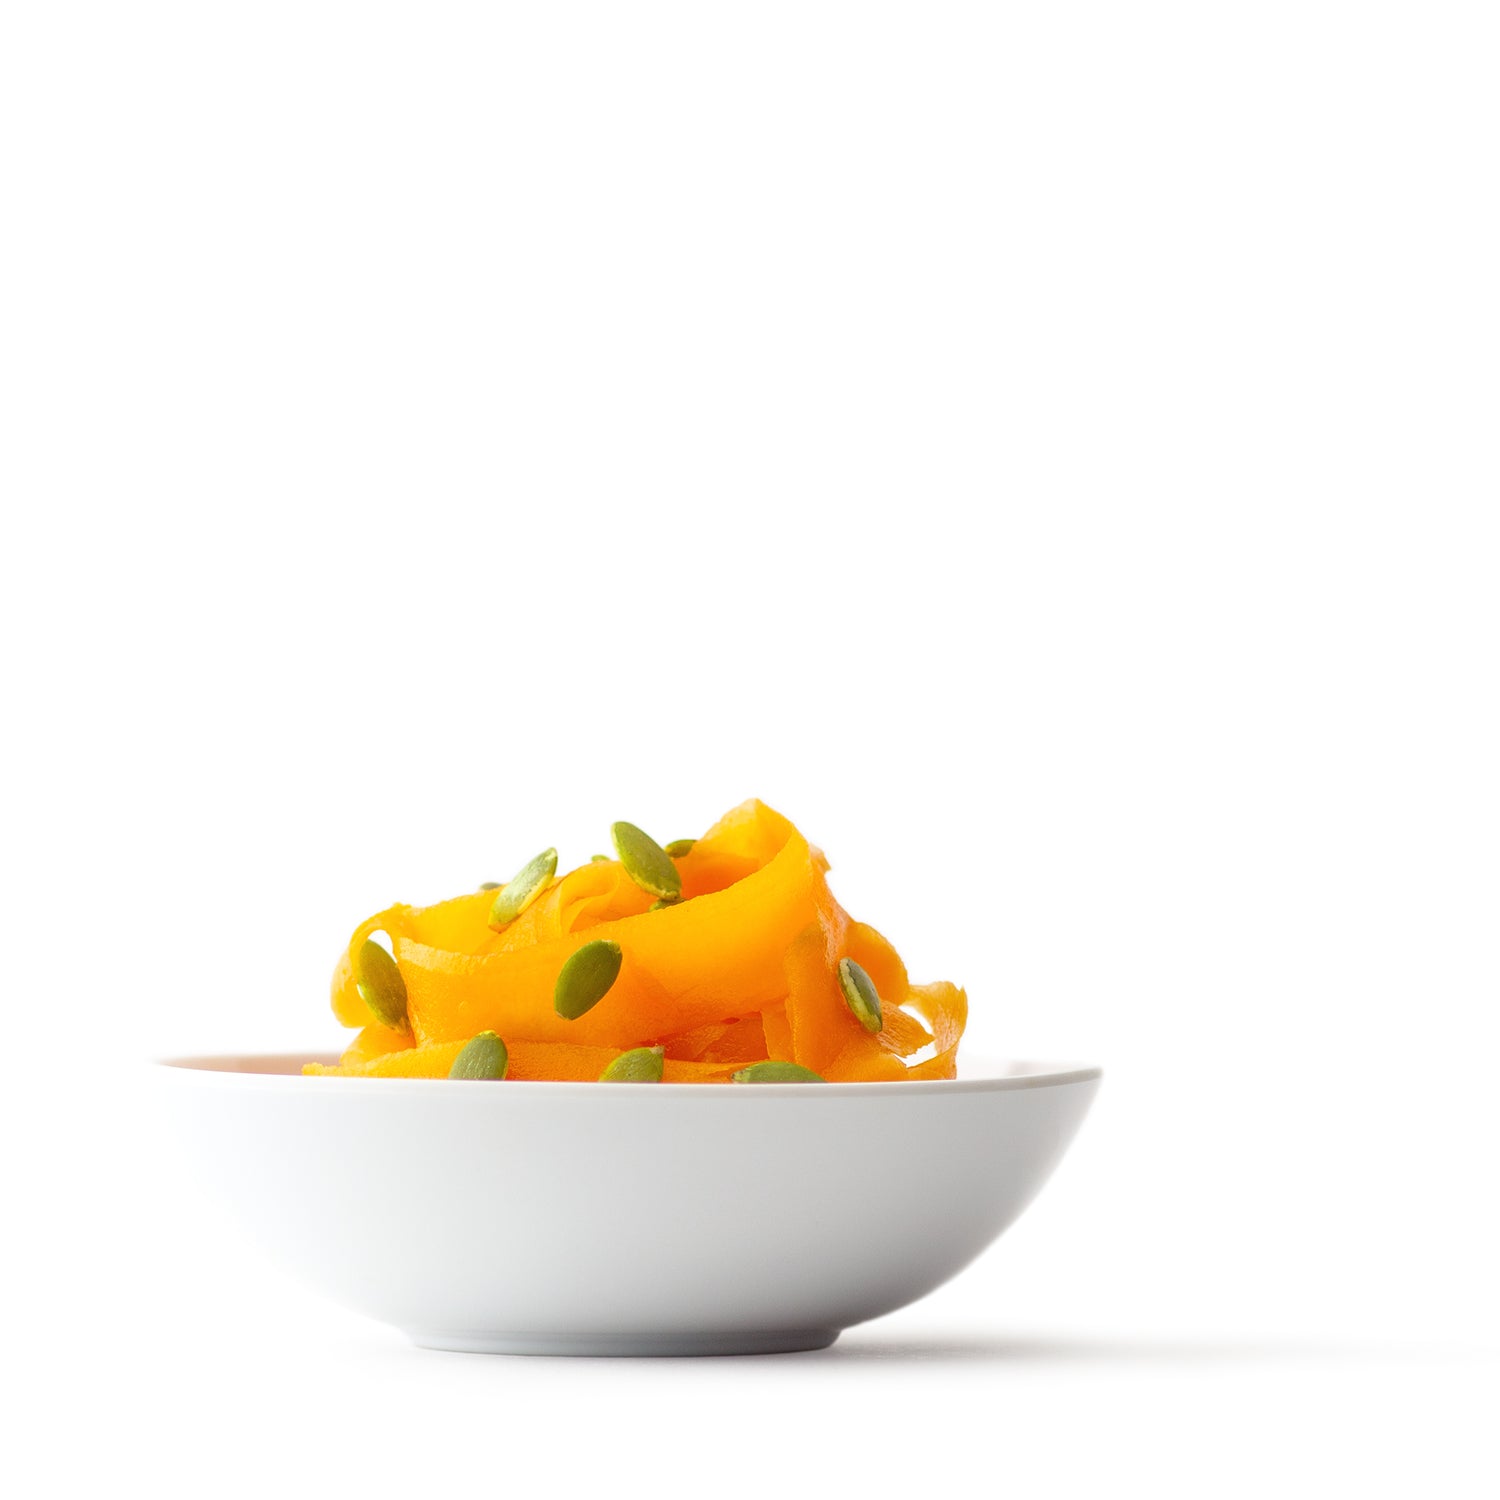 butternut squash salad with scattered pumpkin seeds in a white bowl